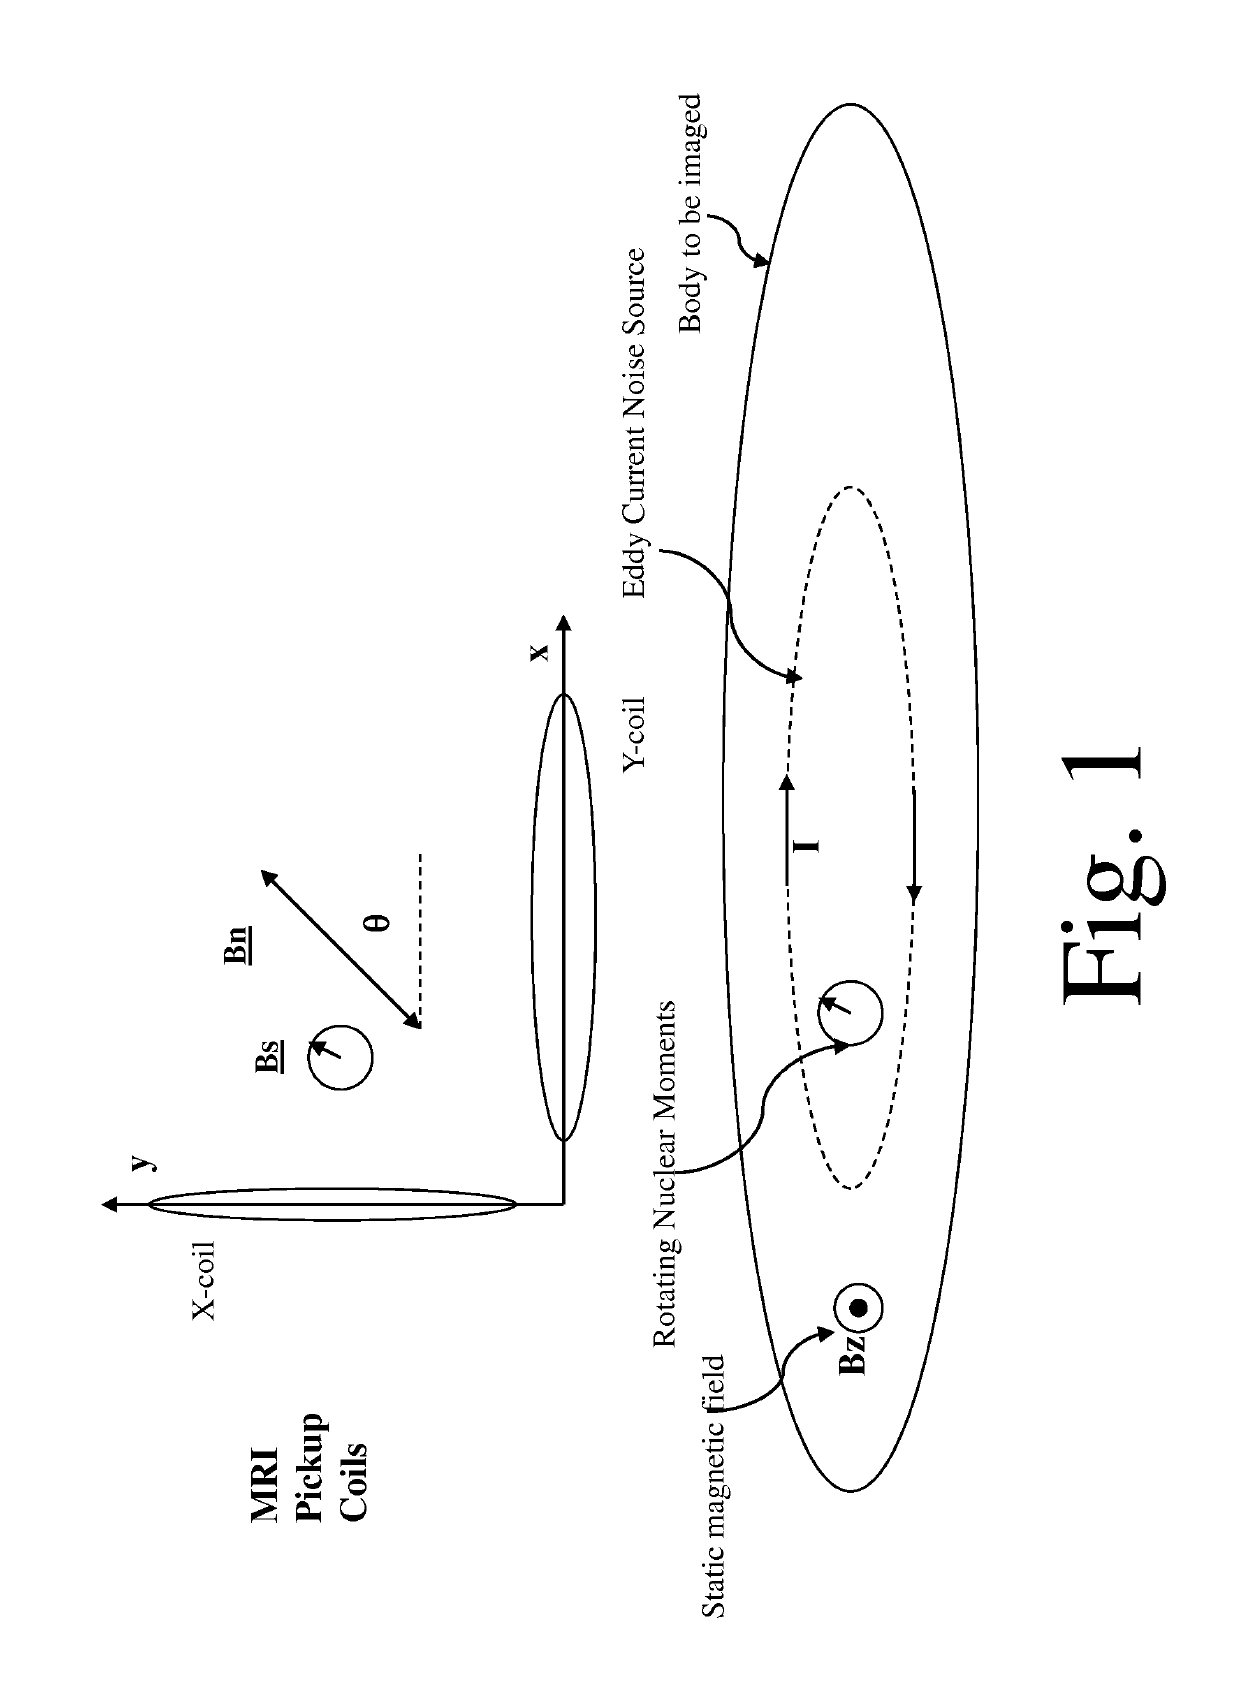 System and method for noise reduction in magnetic resonance imaging